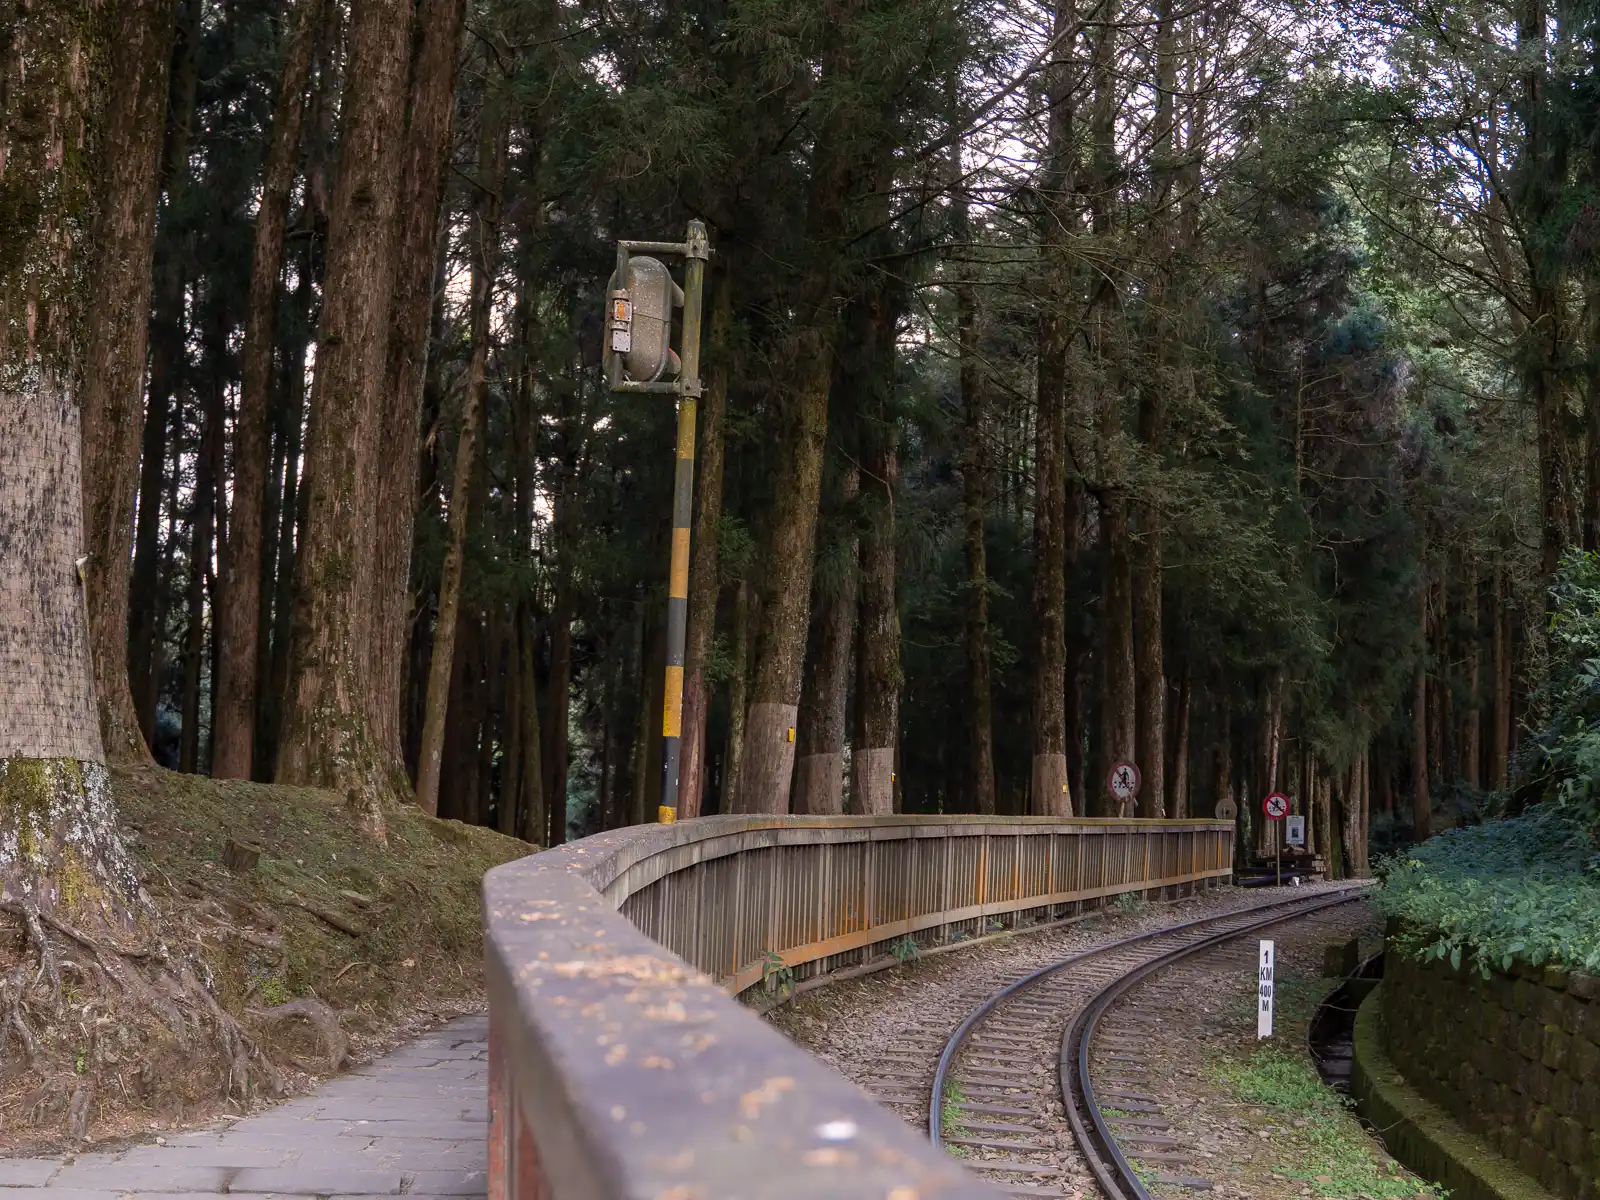 A section of railway track cuts through dense forest, running along a walking path.